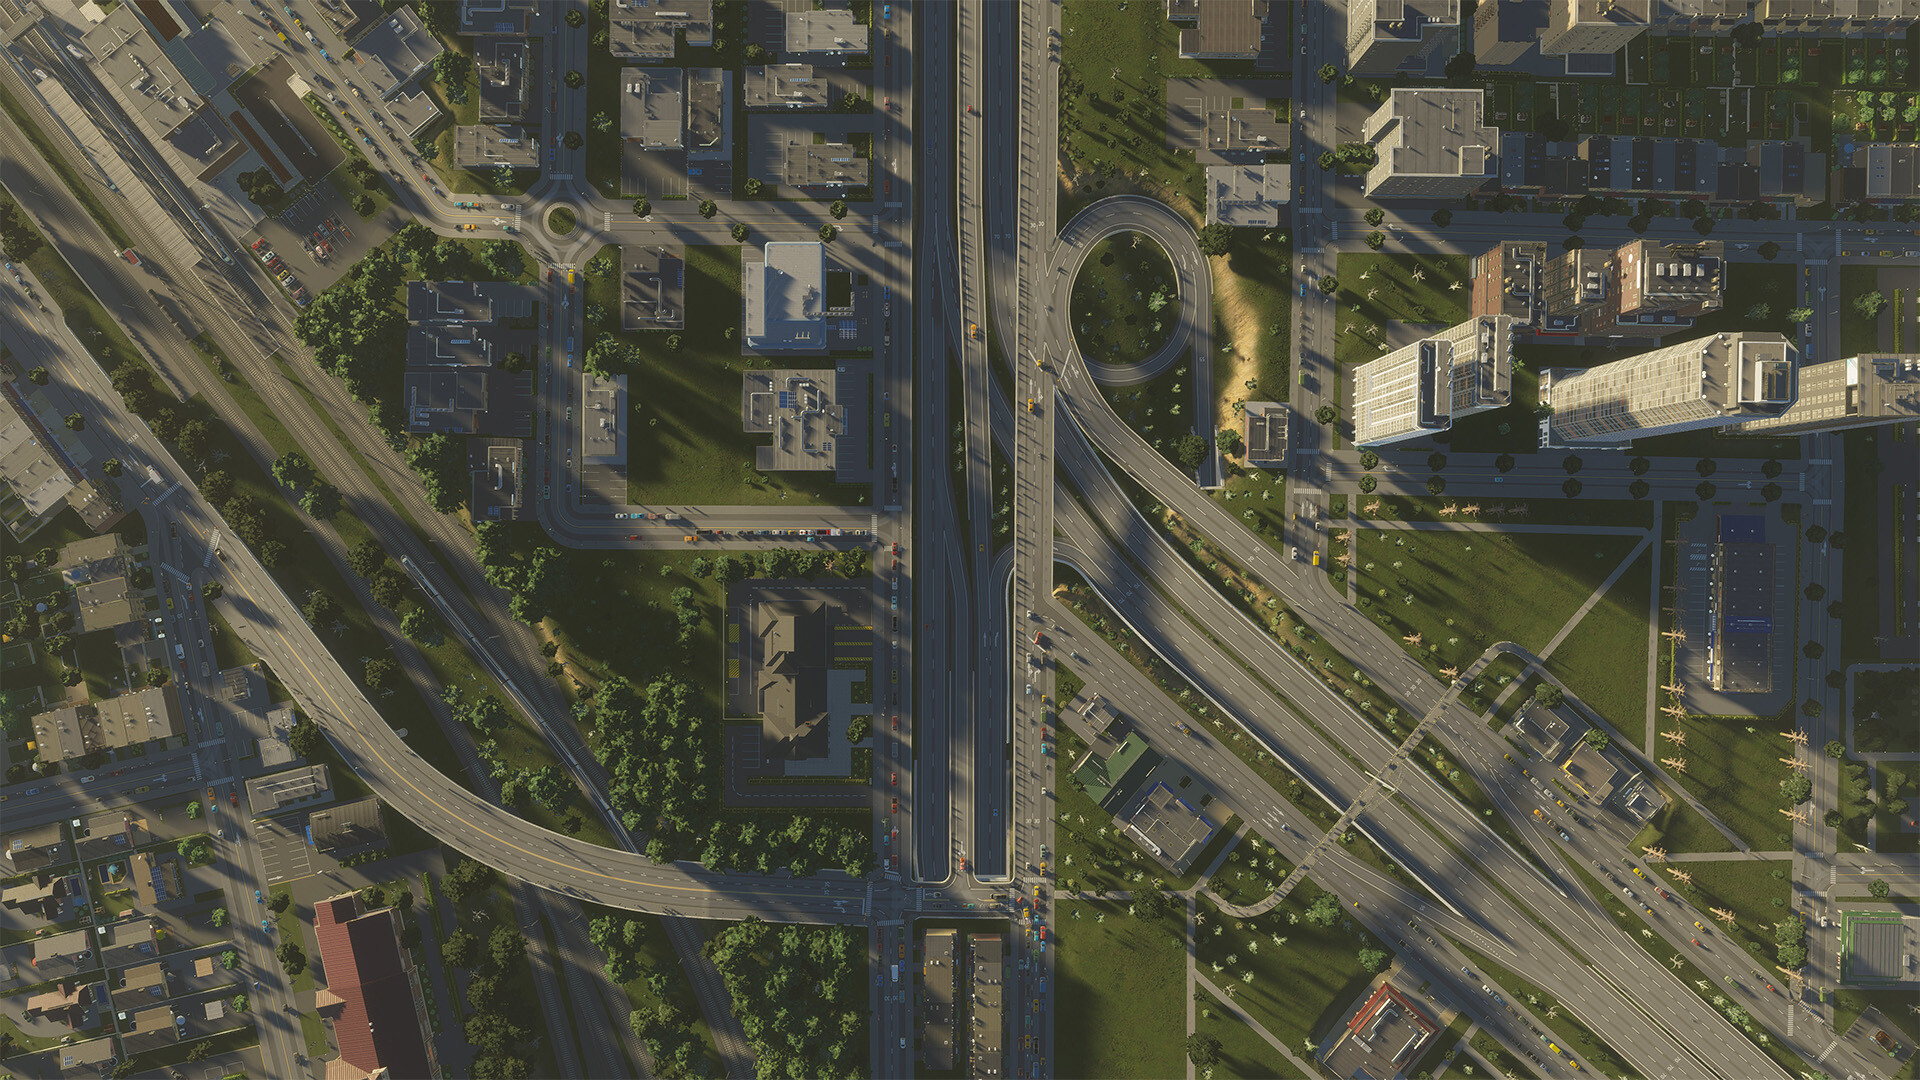 Cities: Skylines 2 will intentionally launch with performance issues